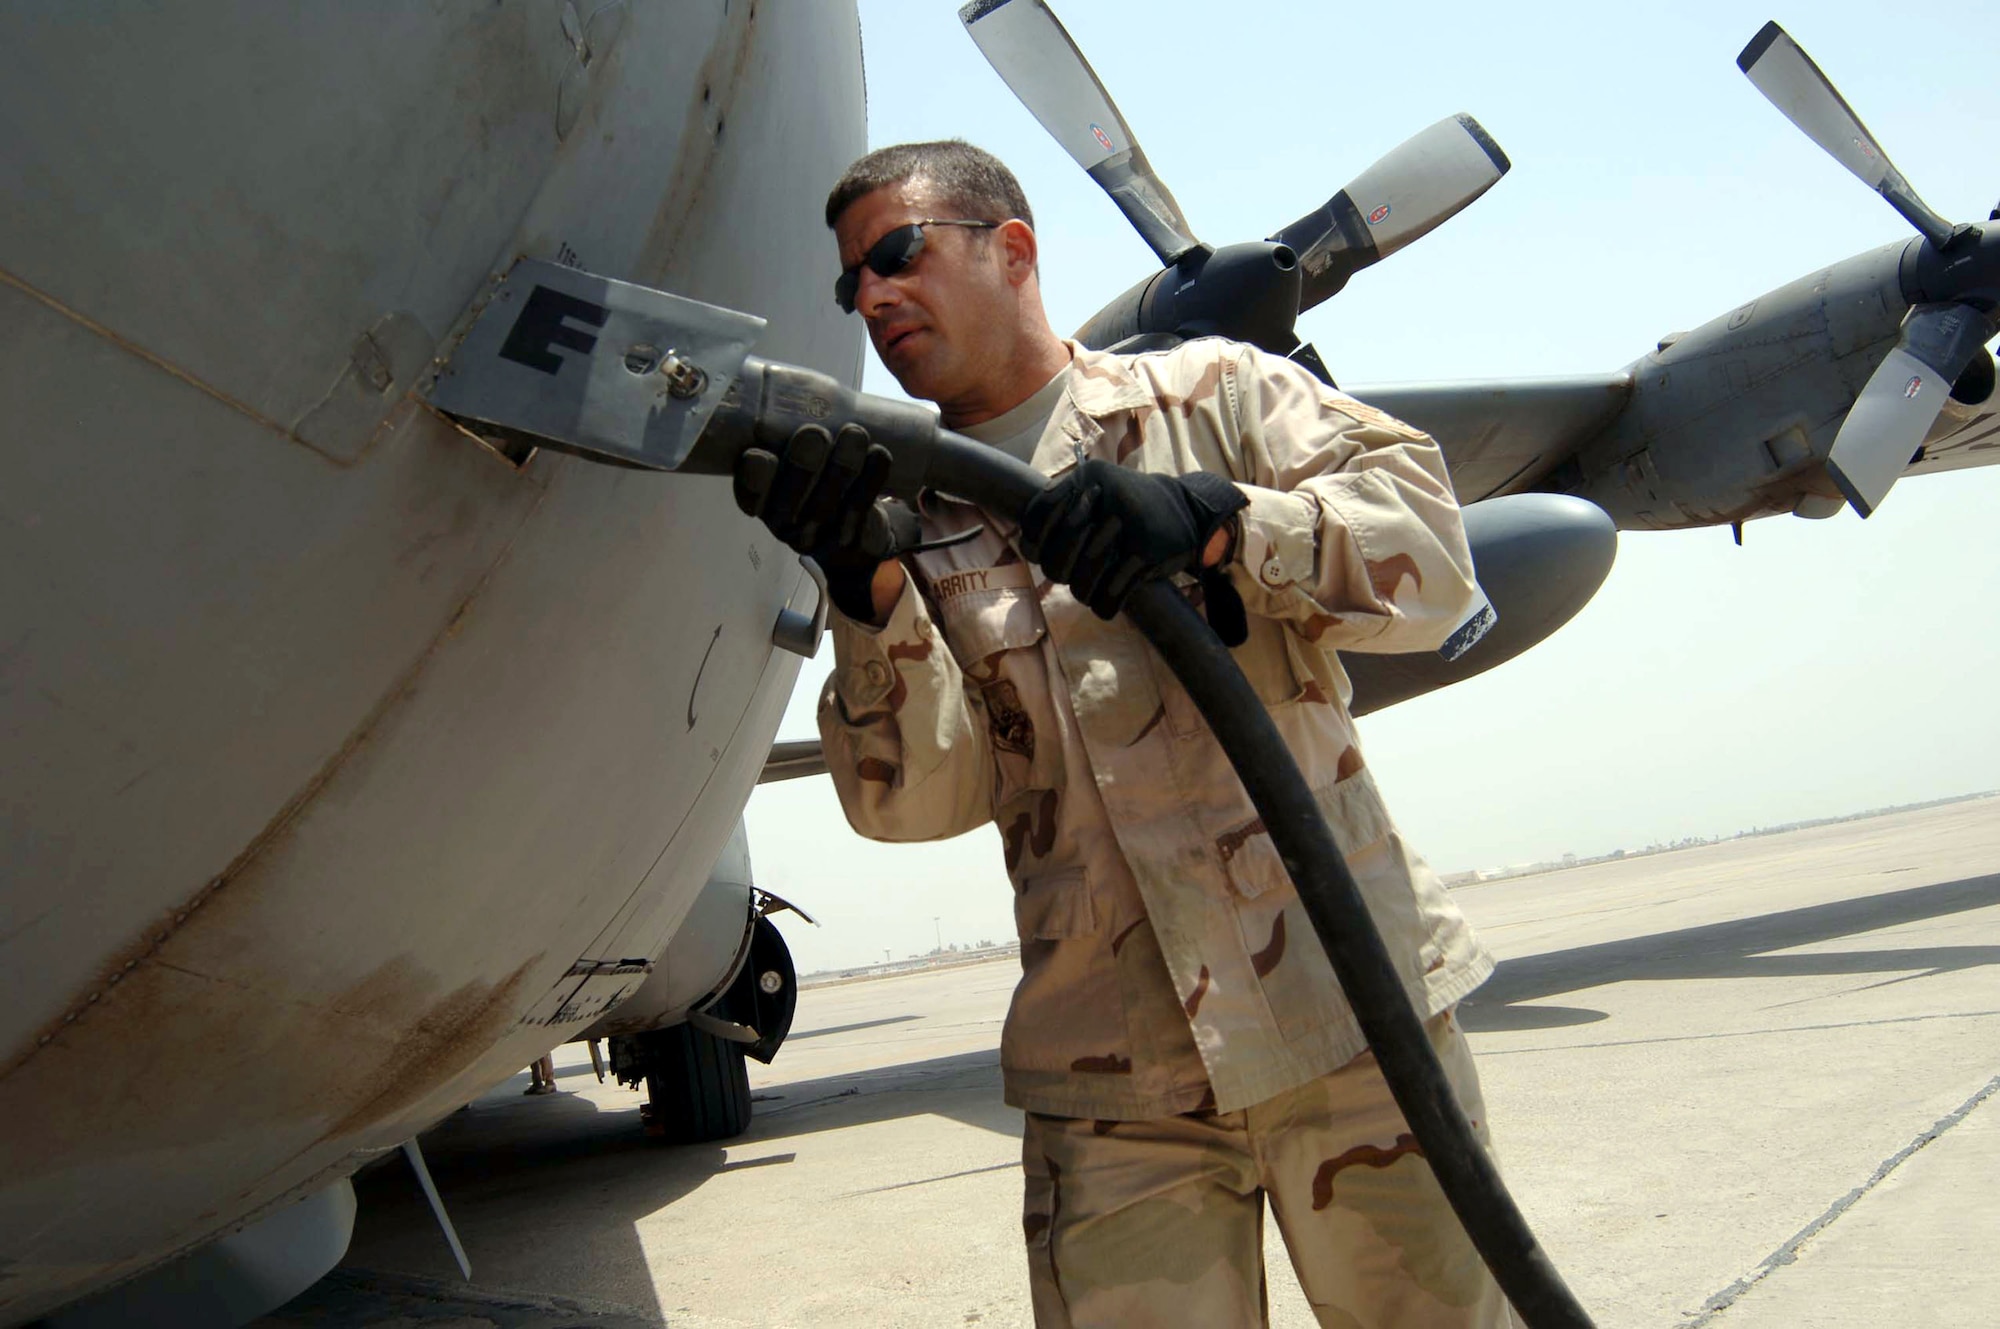 Staff Sgt. David Garrity plugs in external electrical power to a transient C-130 Hercules cargo aircraft July 27 at Baghdad International Airport in Iraq. The 447th Expeditionary Operations Squadron transient alert team coordinates all traffic on the military airfield here. An average day brings in more than 100 fixed and rotary wing aircraft. Sergeant Garrity is a 447th Expeditionary Operations Squadron crew chief. (U.S. Air Force photo/Tech. Sgt. Russell Wicke) 
